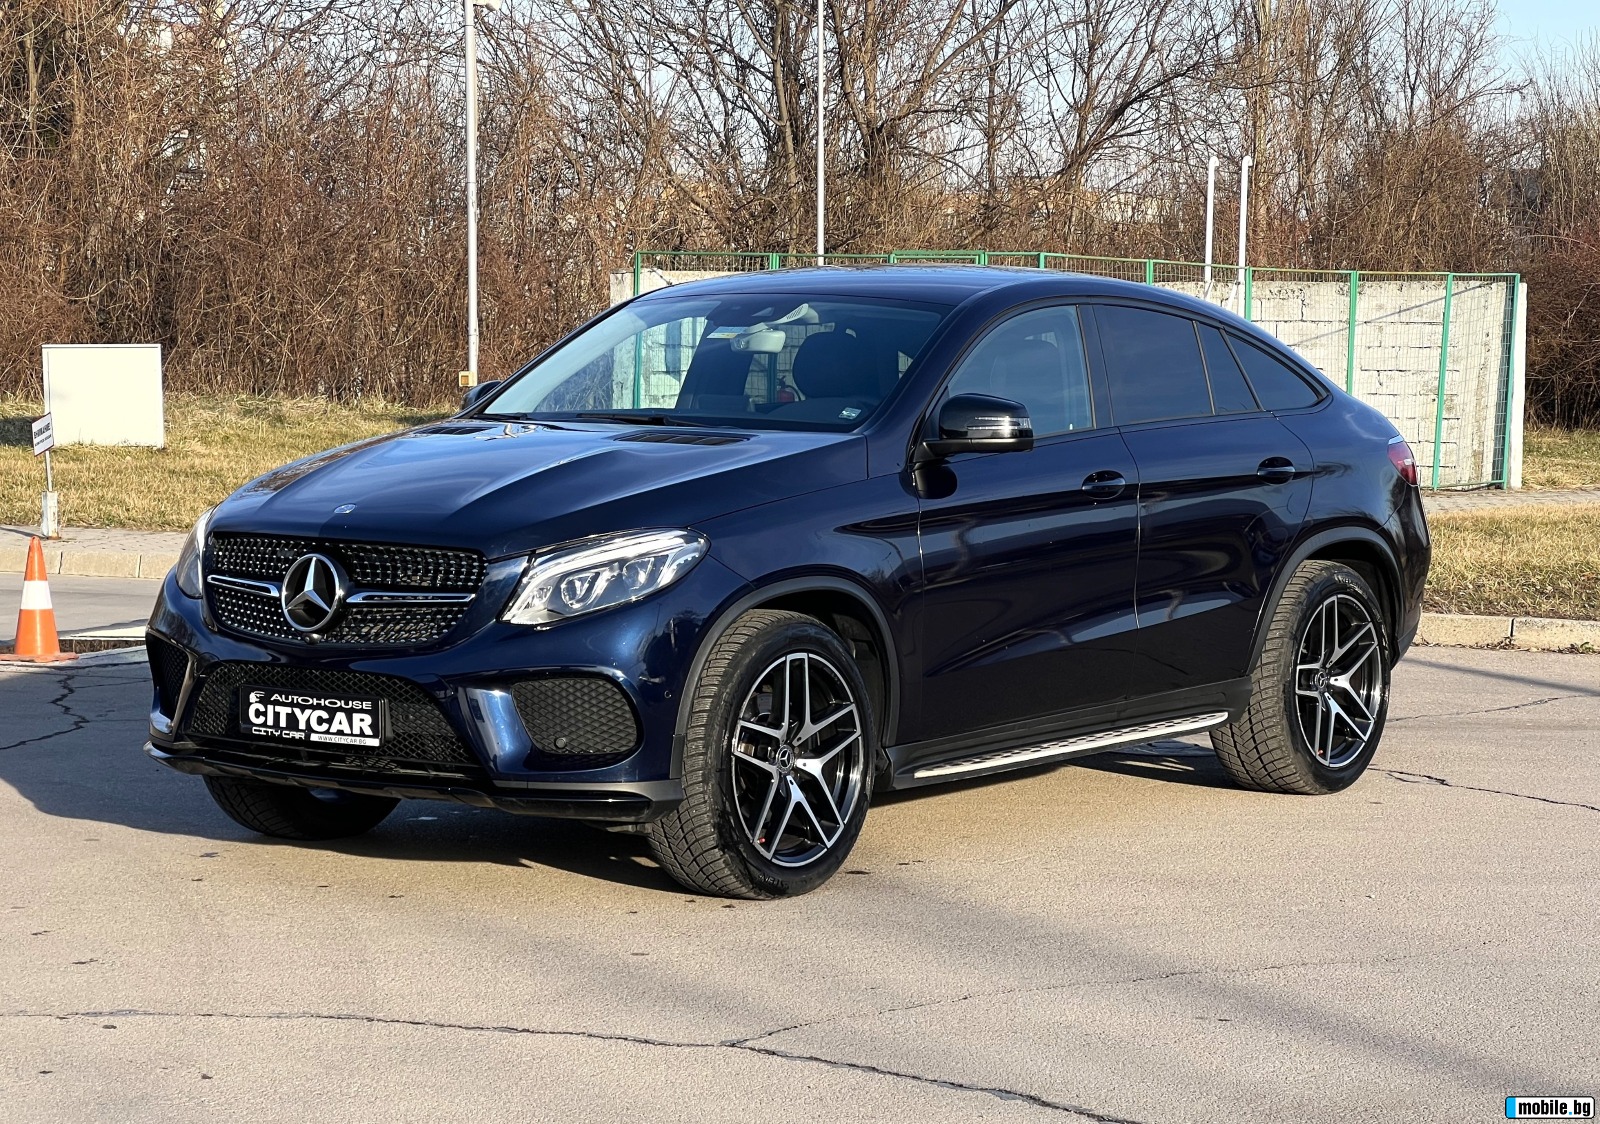 Mercedes-Benz GLE 350 d/ AMG/ COUPE/ 4MATIC/ NIGHT/AIRMATIC/360 CAM/ 21/ | Mobile.bg   3